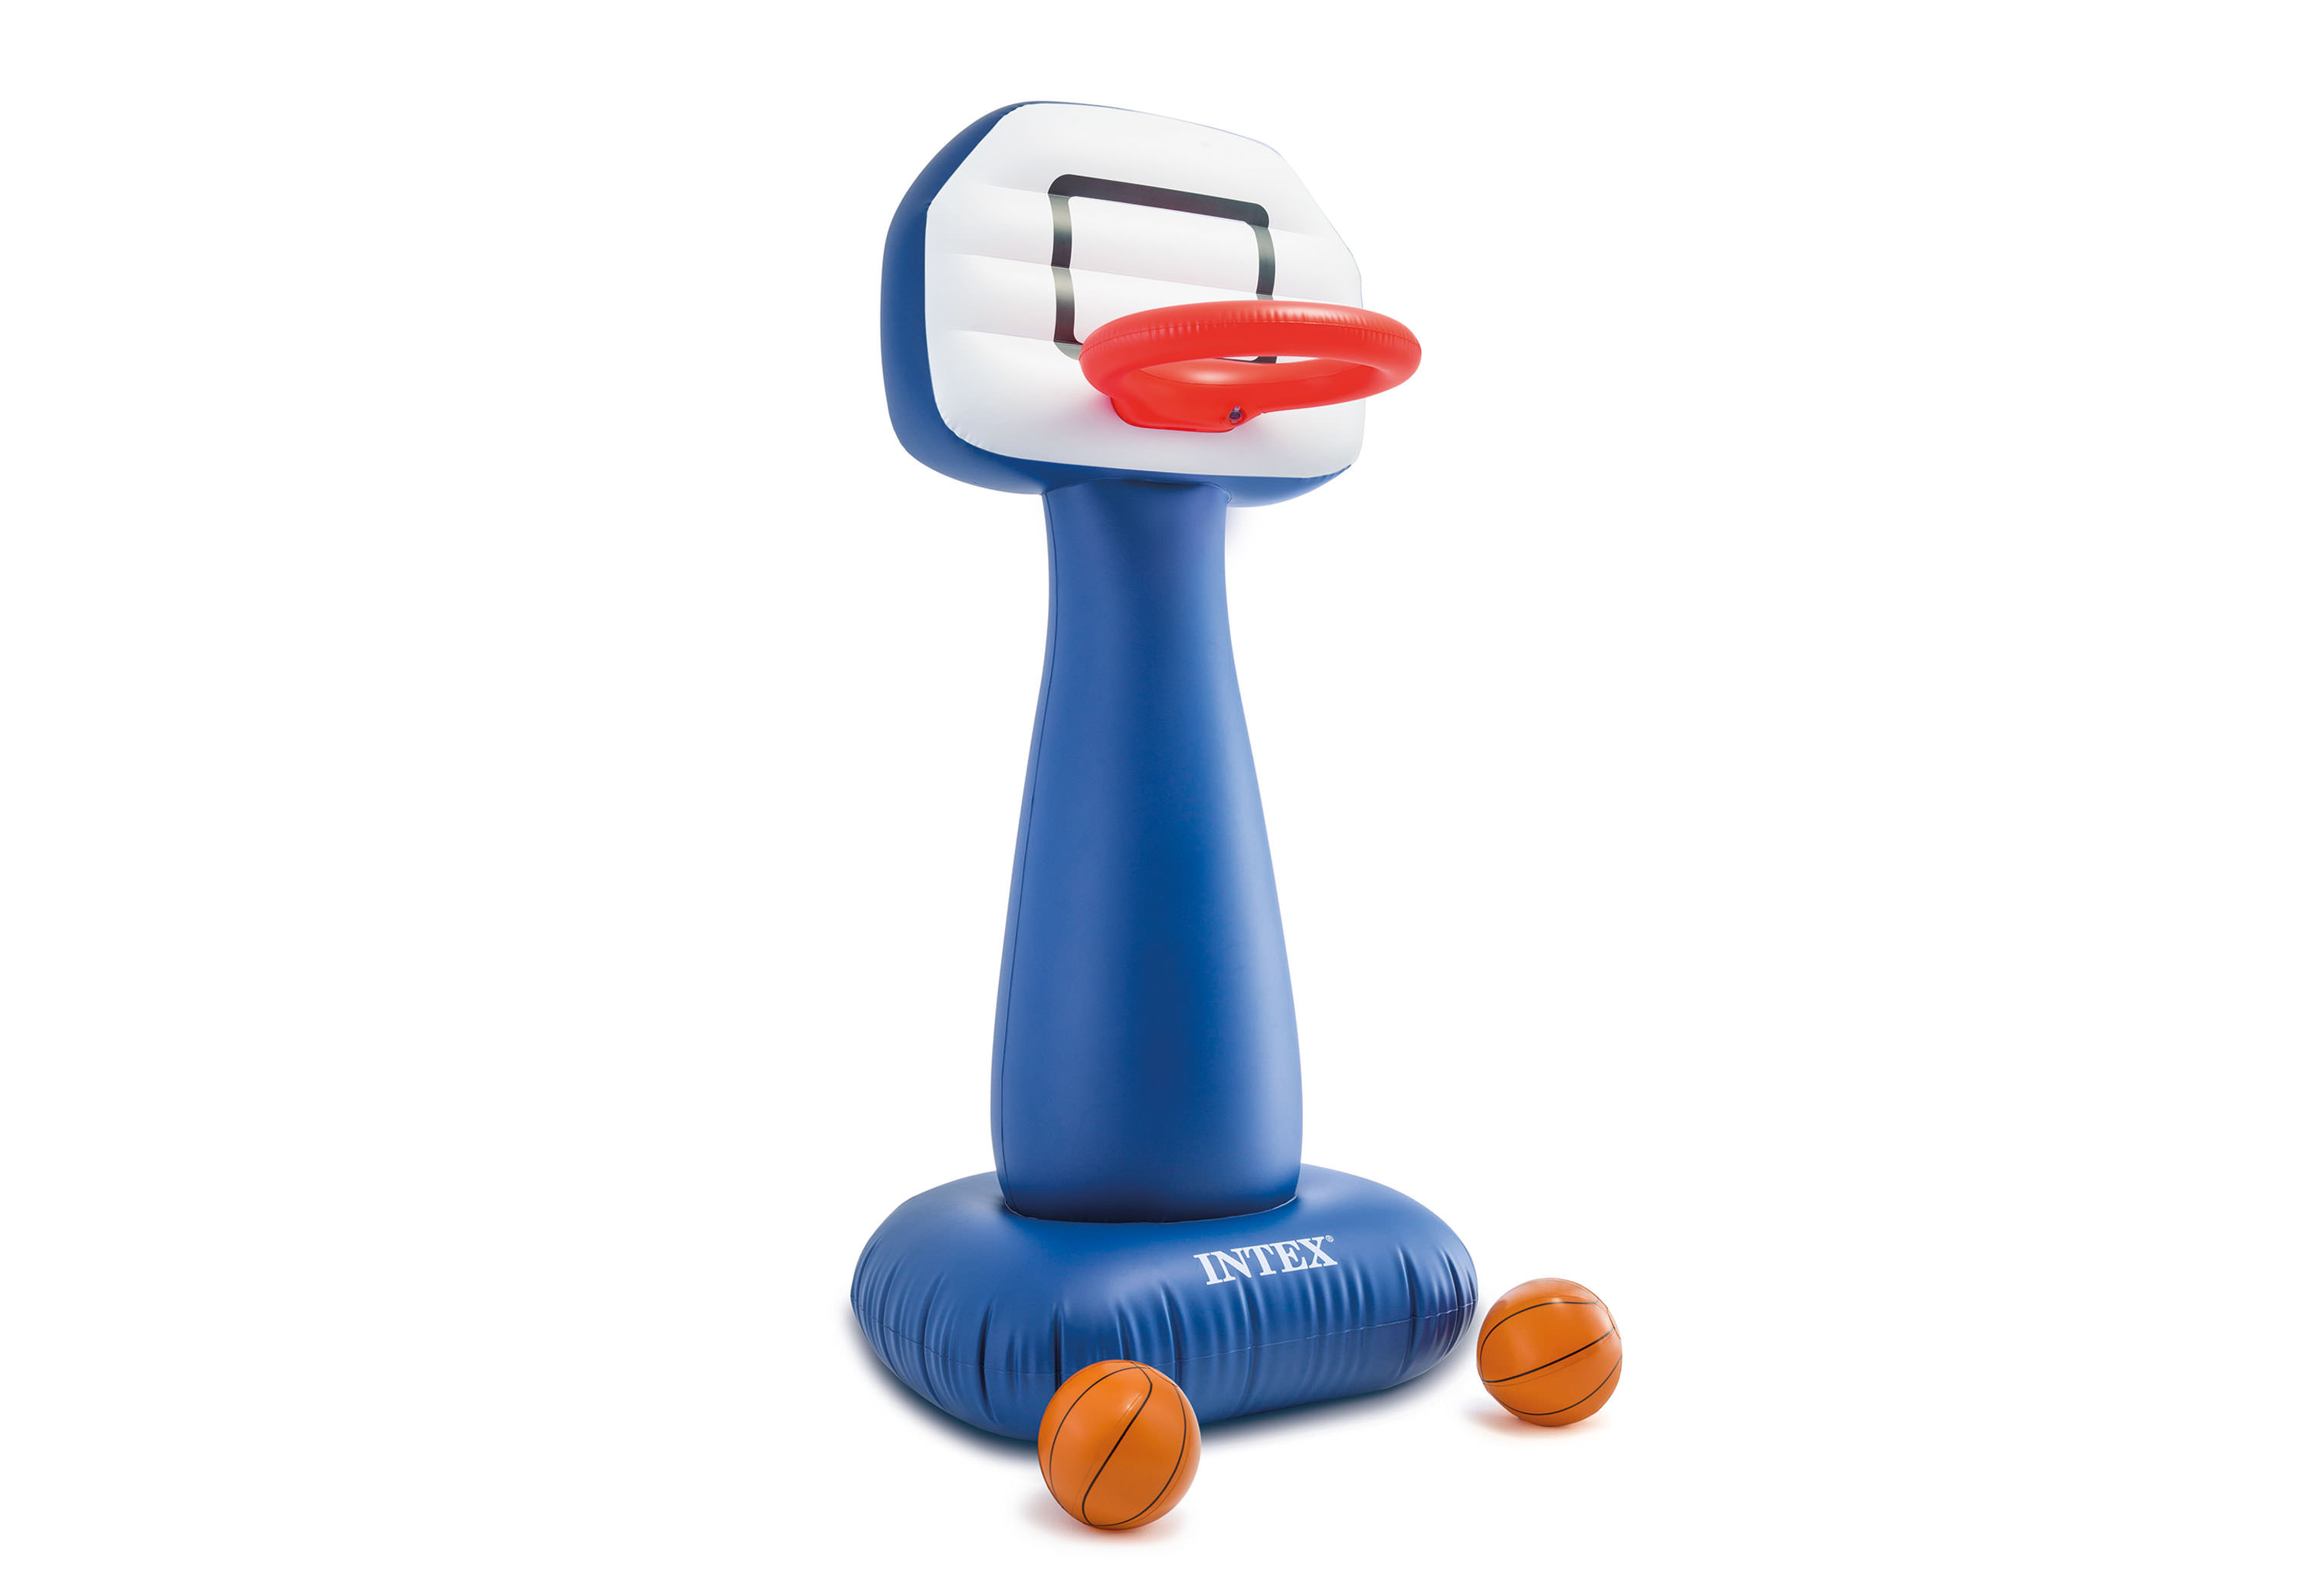 Intex Inflatable Shootin' Hoops Set with Two Inflatable Balls - image 3 of 3